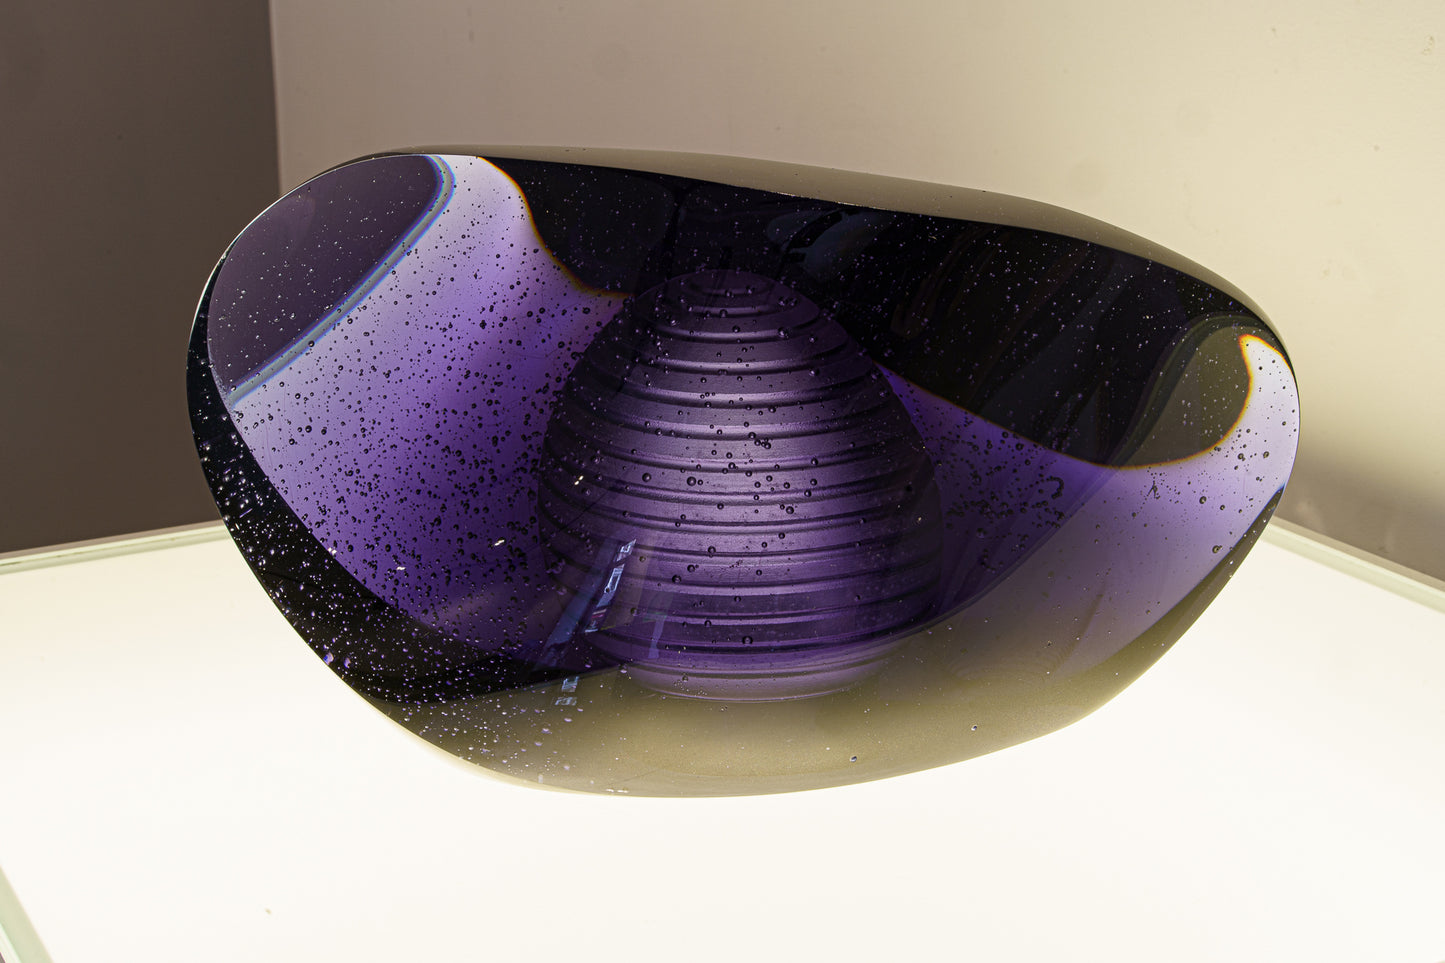 Handmade Molded Glass Urns For Ashes by Pulvis Art Urns 